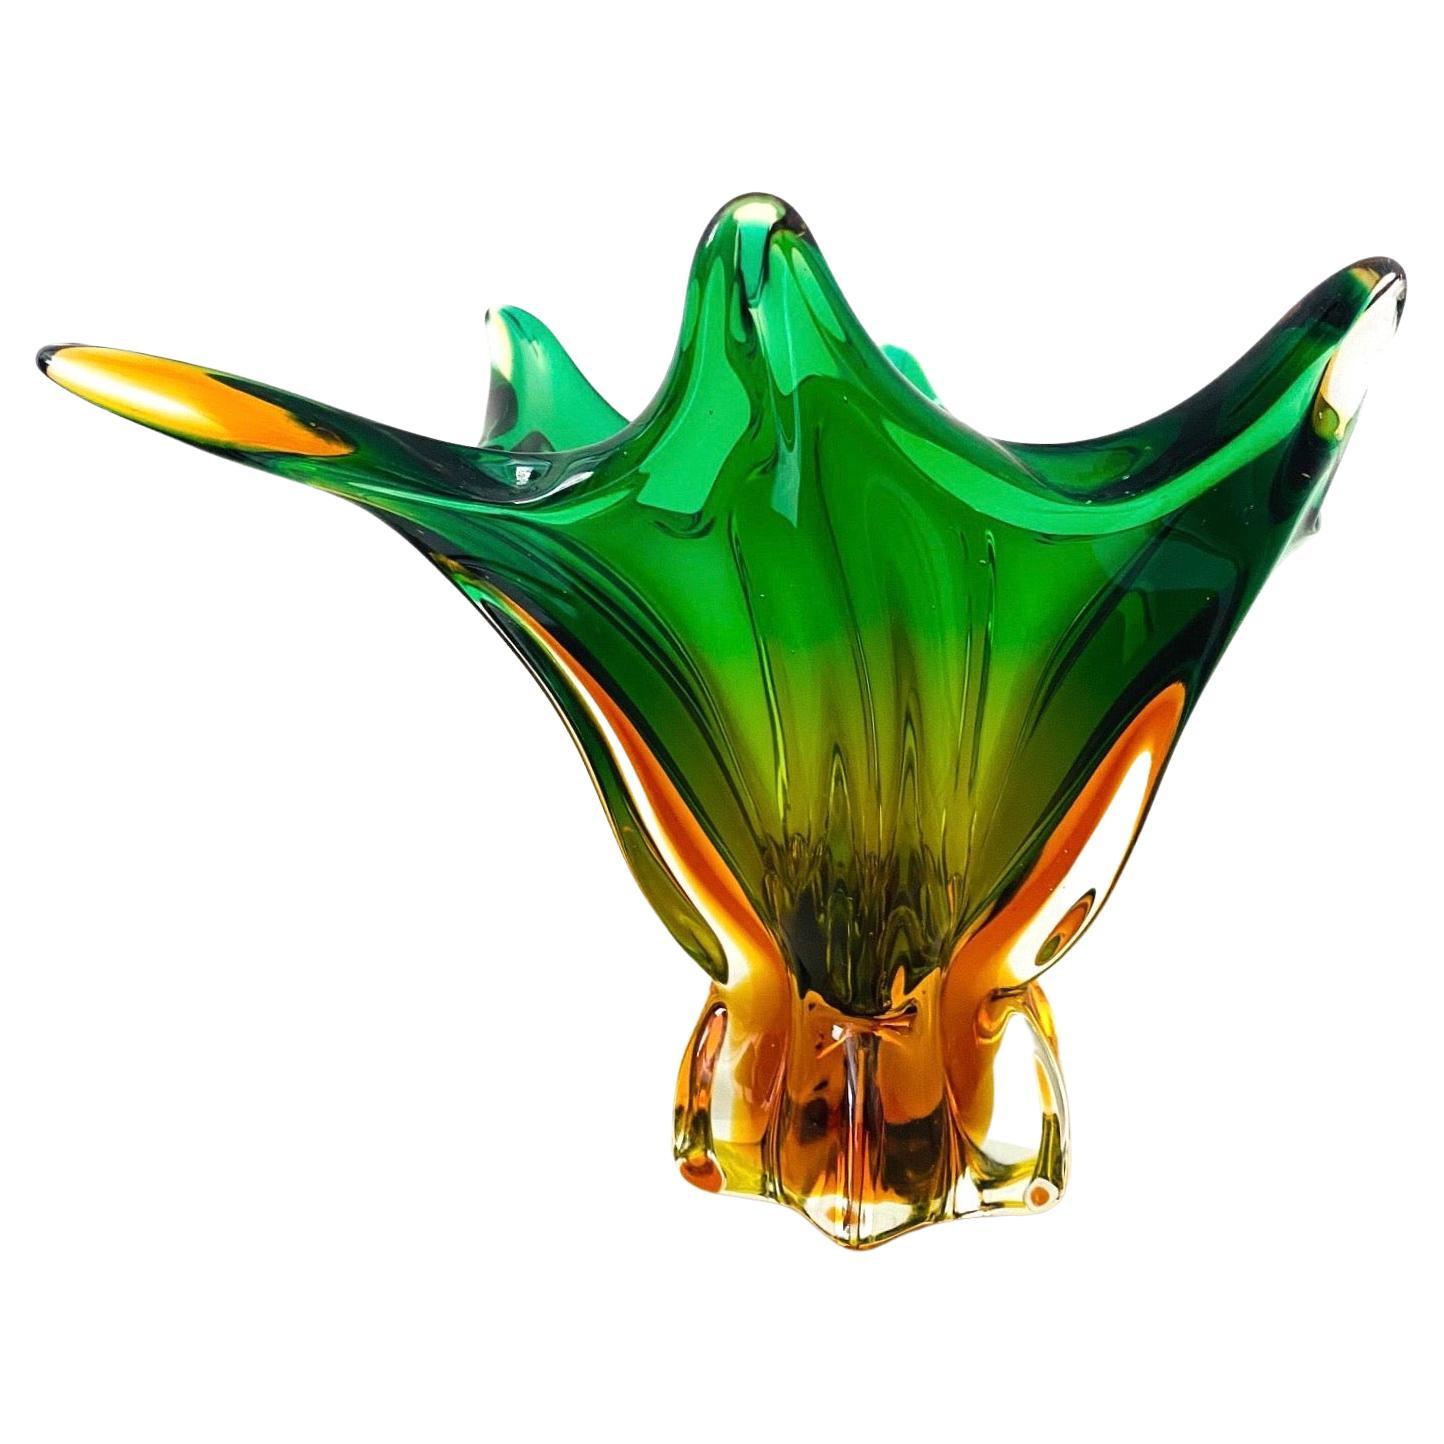 Abstract Murano Sommerso Vase or Bowl in Emerald Green & Orange, Italy, c. 1950